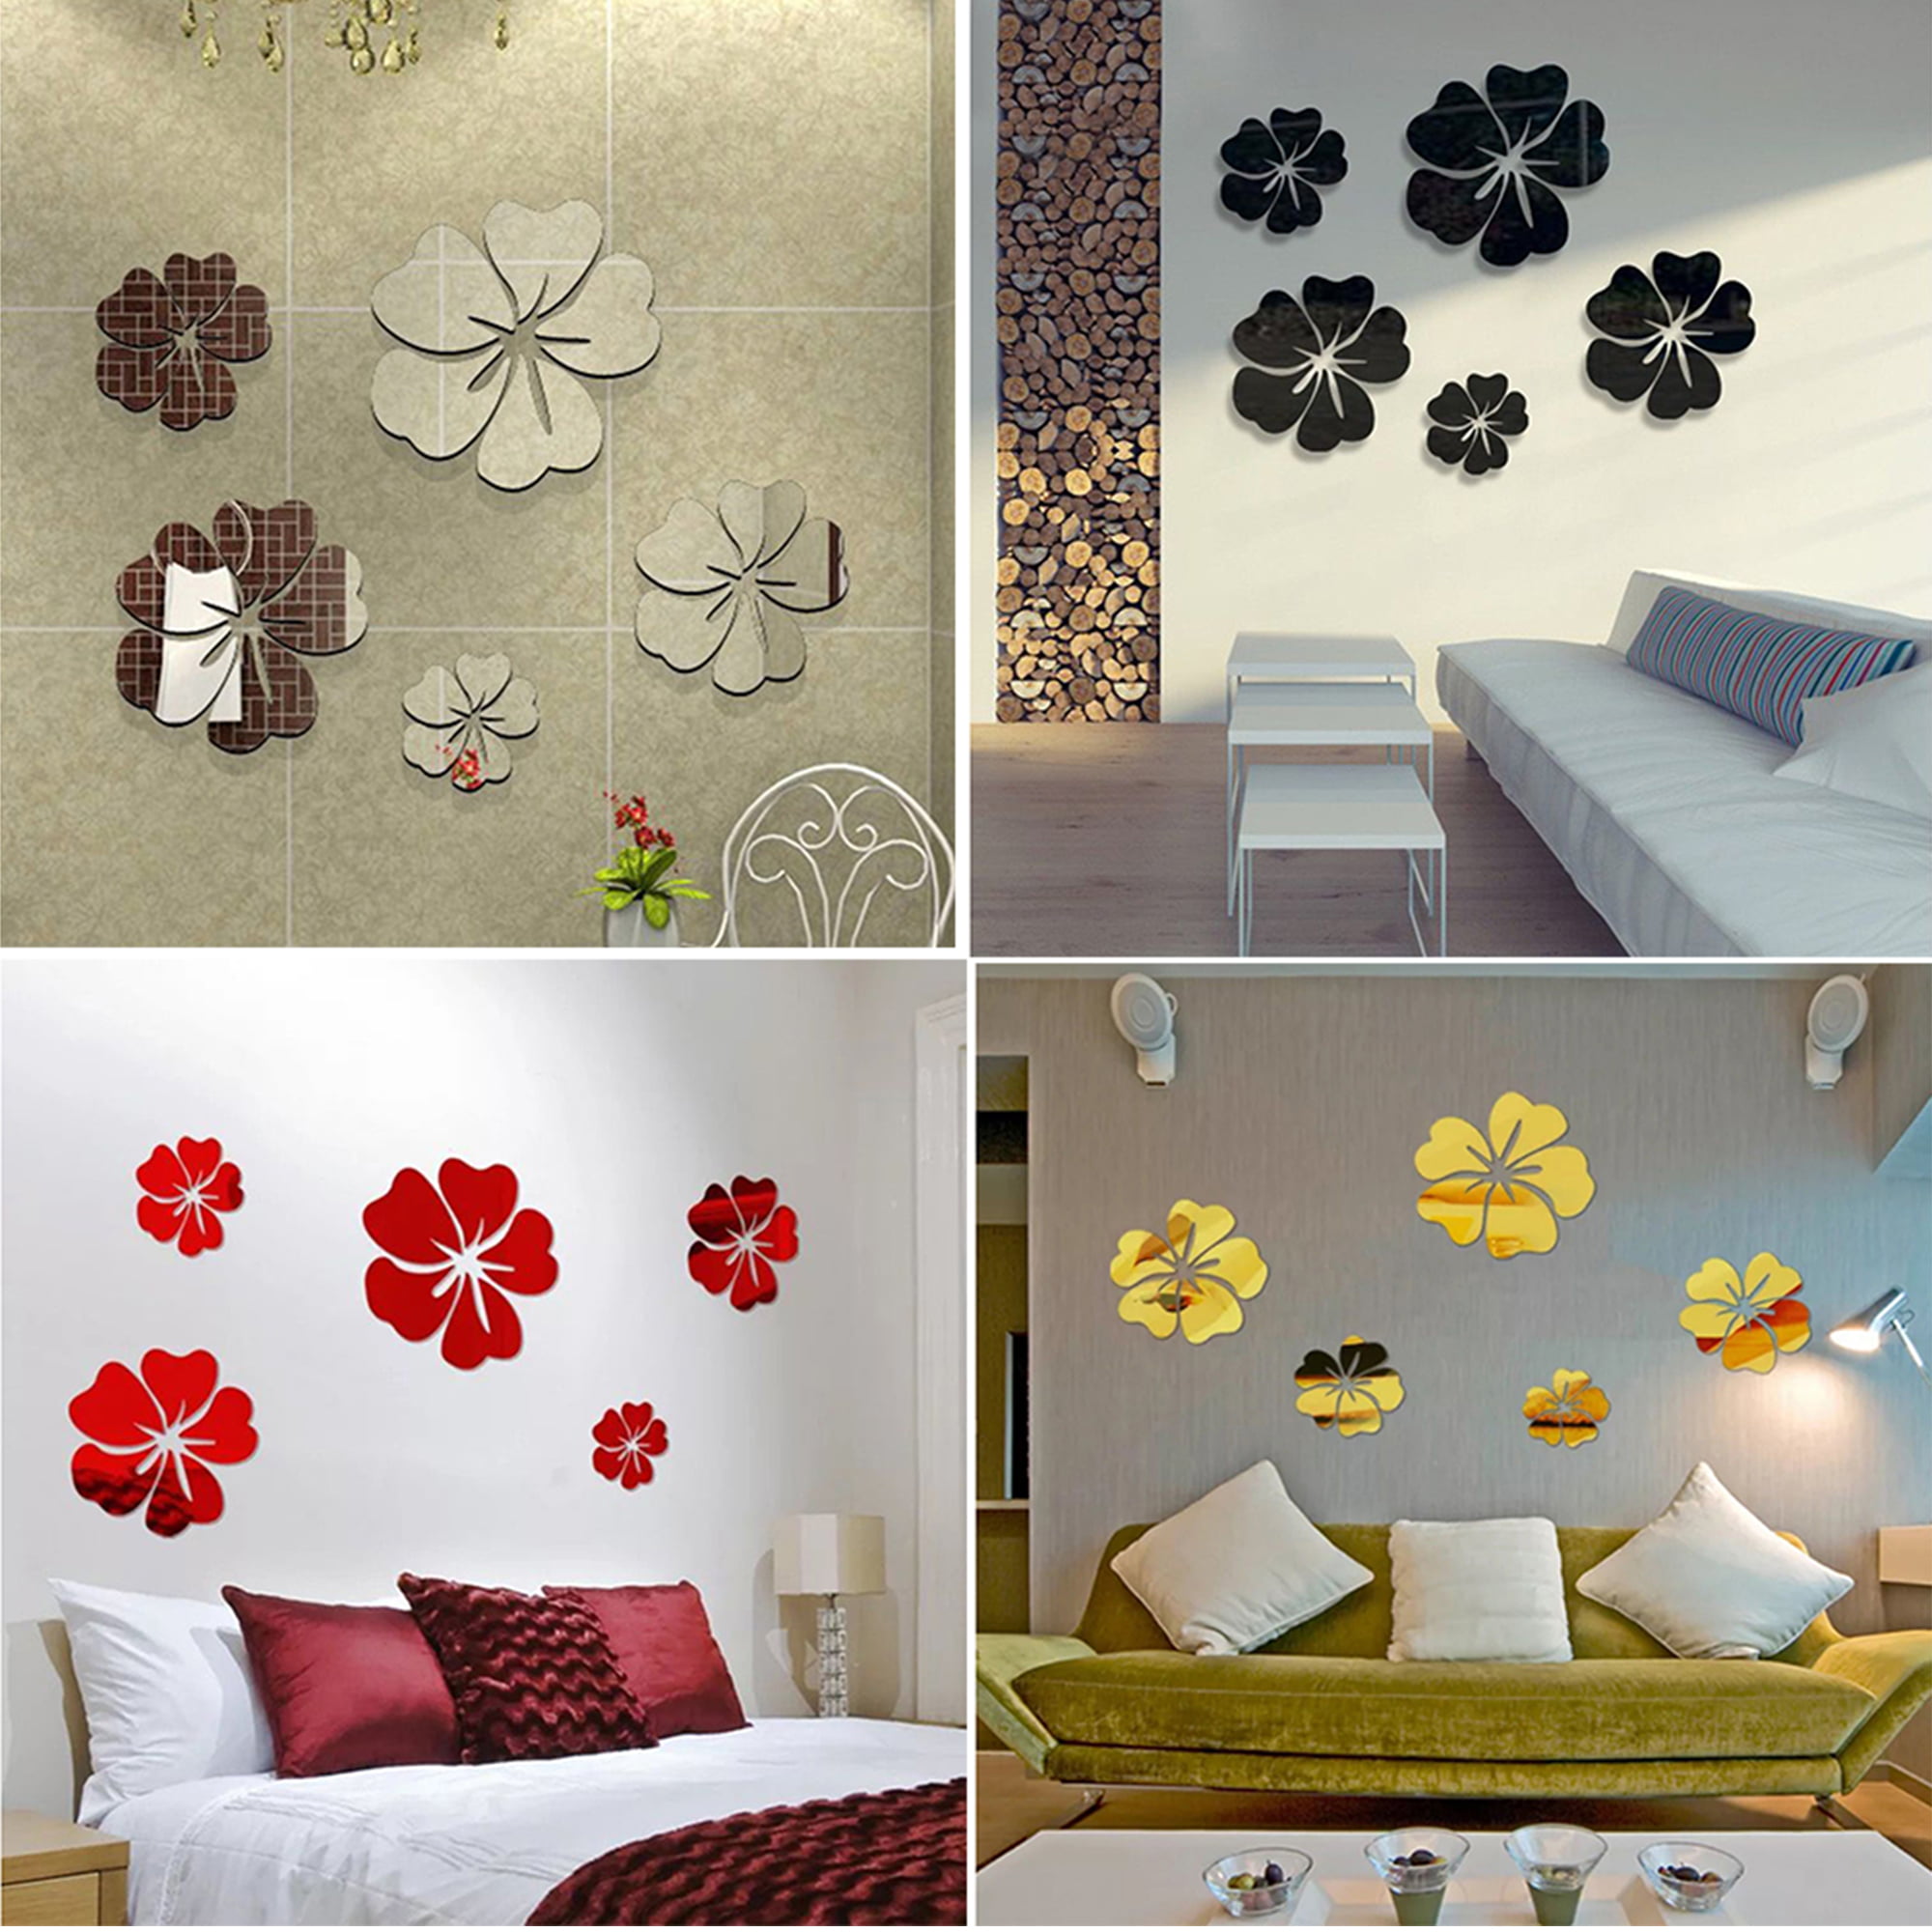 5pcs Flower Wall Mirror Sticker 3D Removable Art Mural Decal DIY Dining Room Bedroom Kitchen